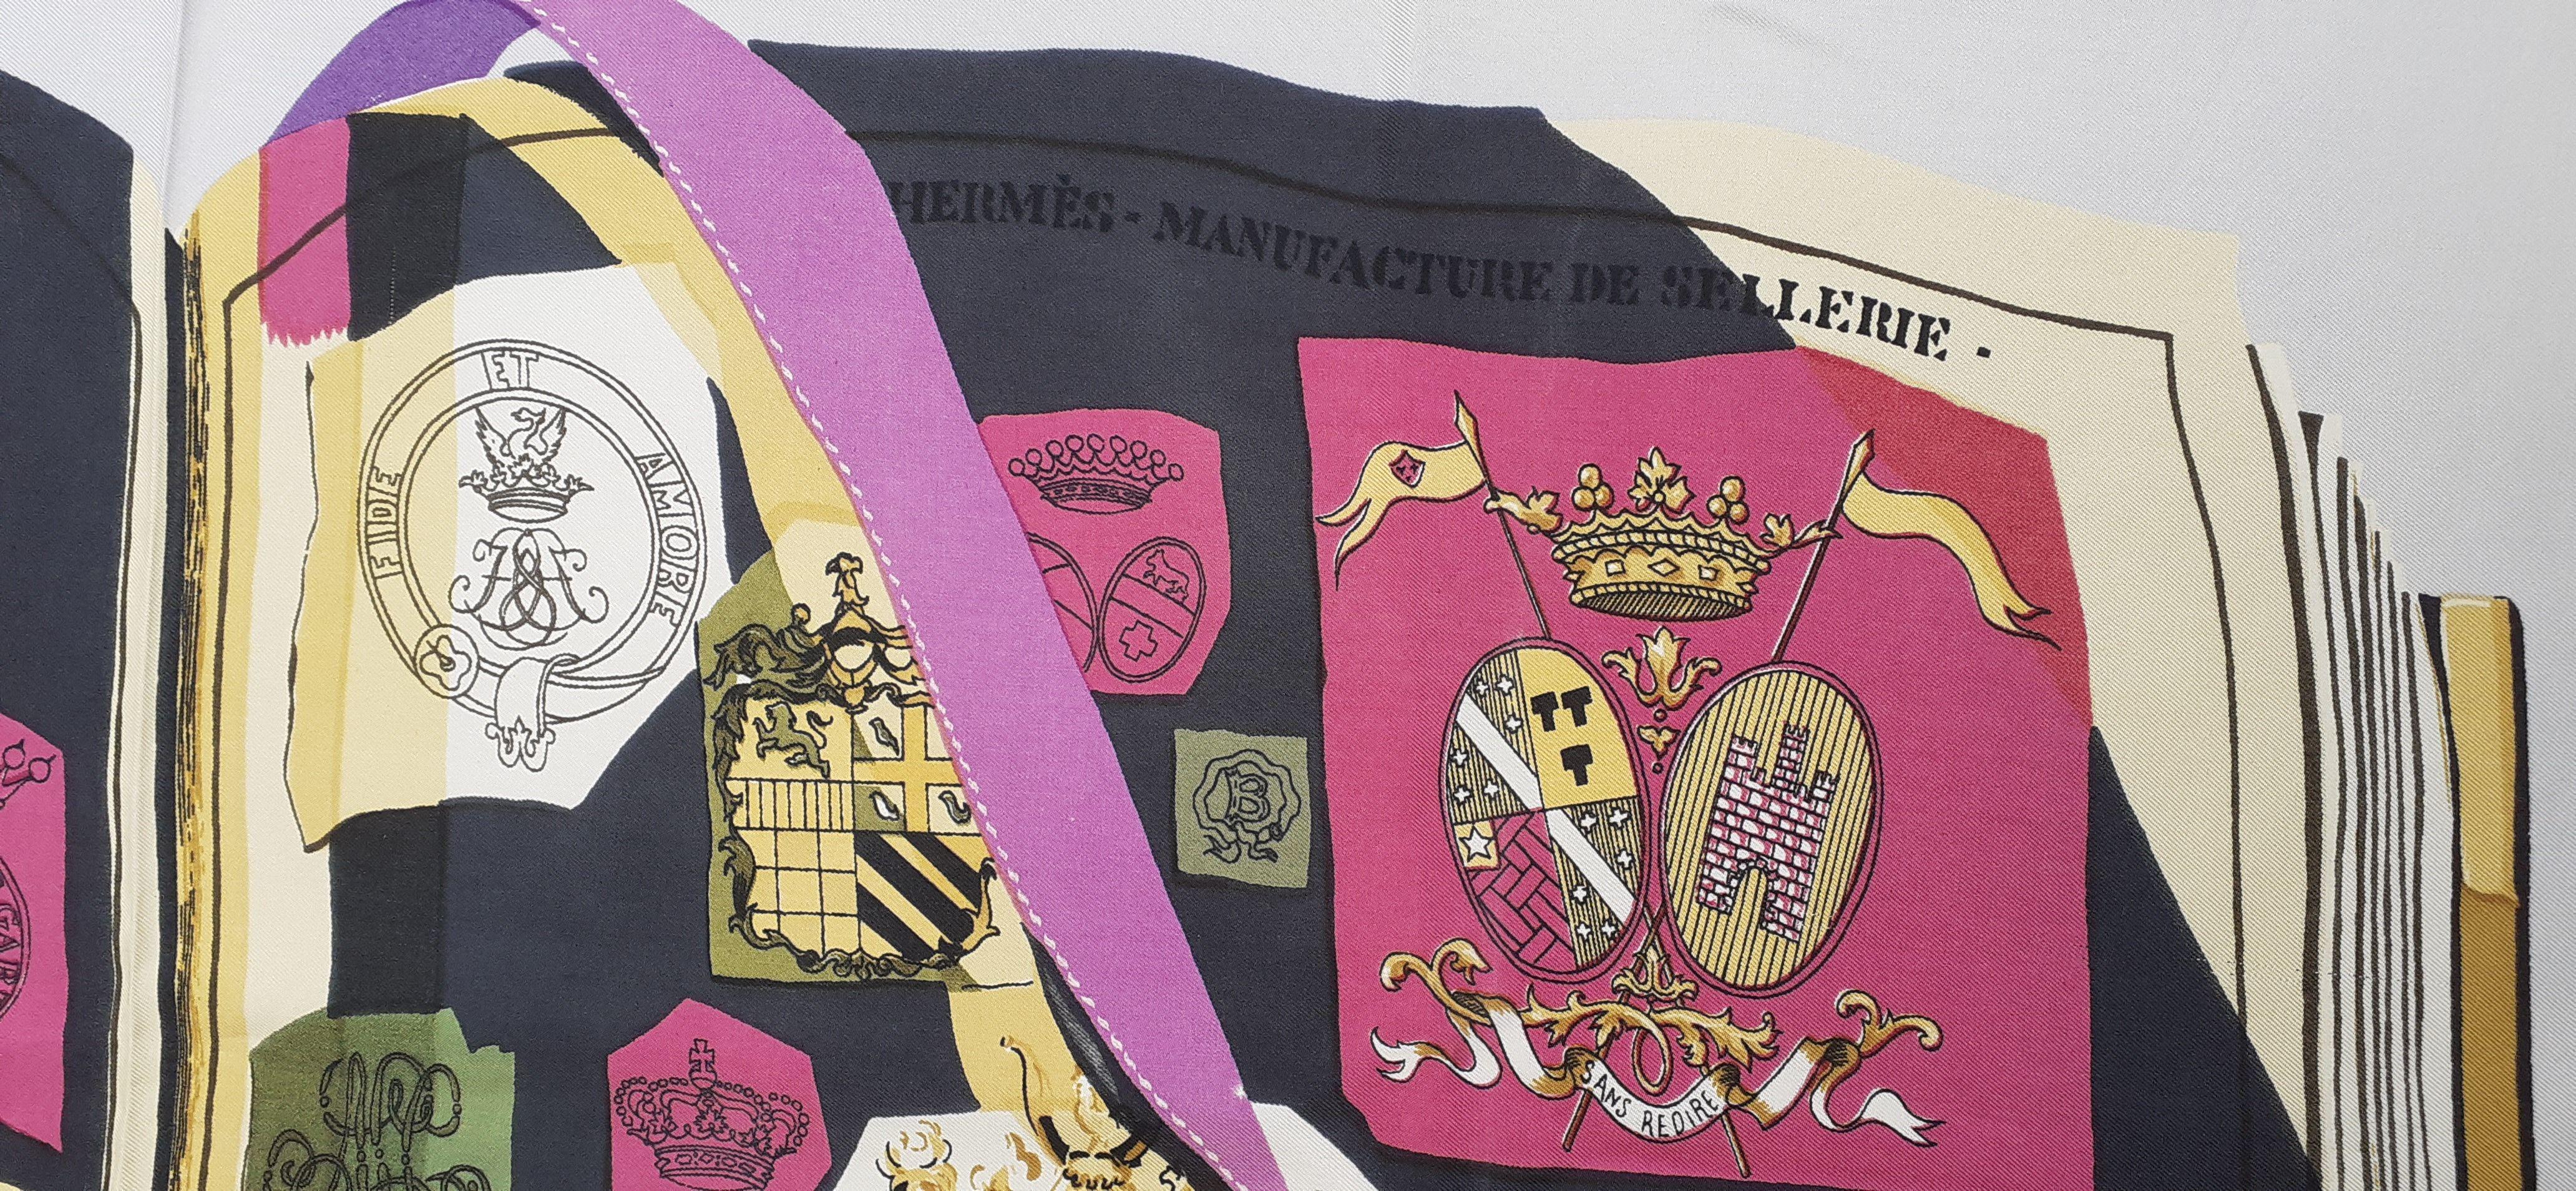 Exceptional Hermès Silk Scarf Chiffres et Monogrammes Lise Coutin 1962 Collector For Sale 5